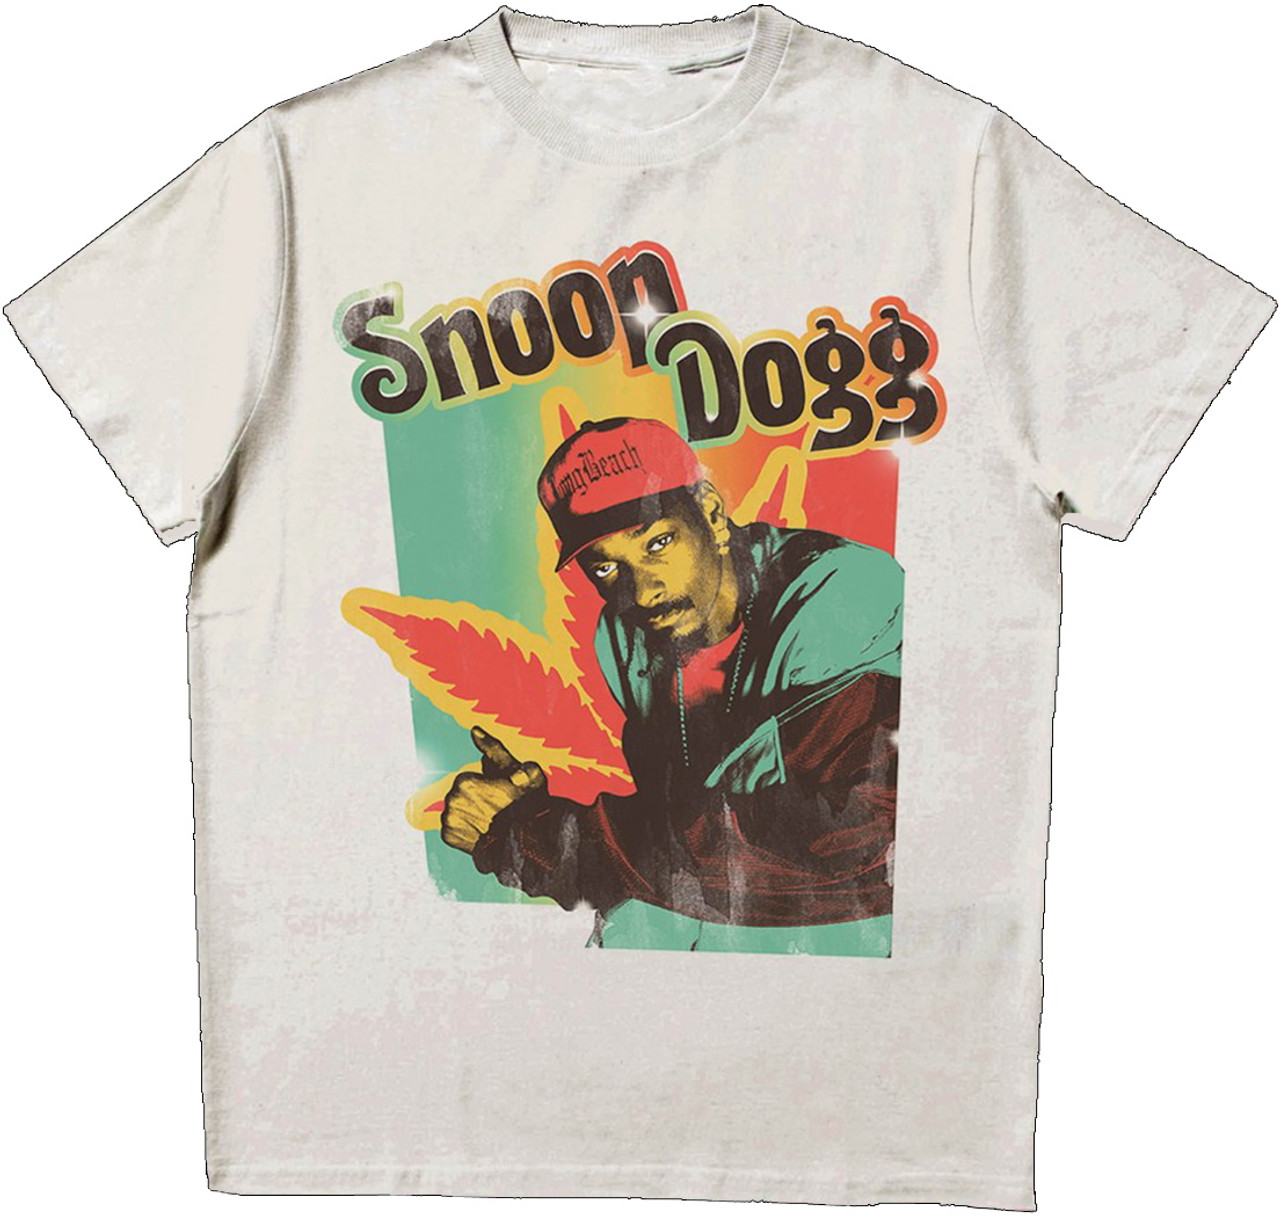 Empire state “snoop dog” Tシャツ スヌープドッグ